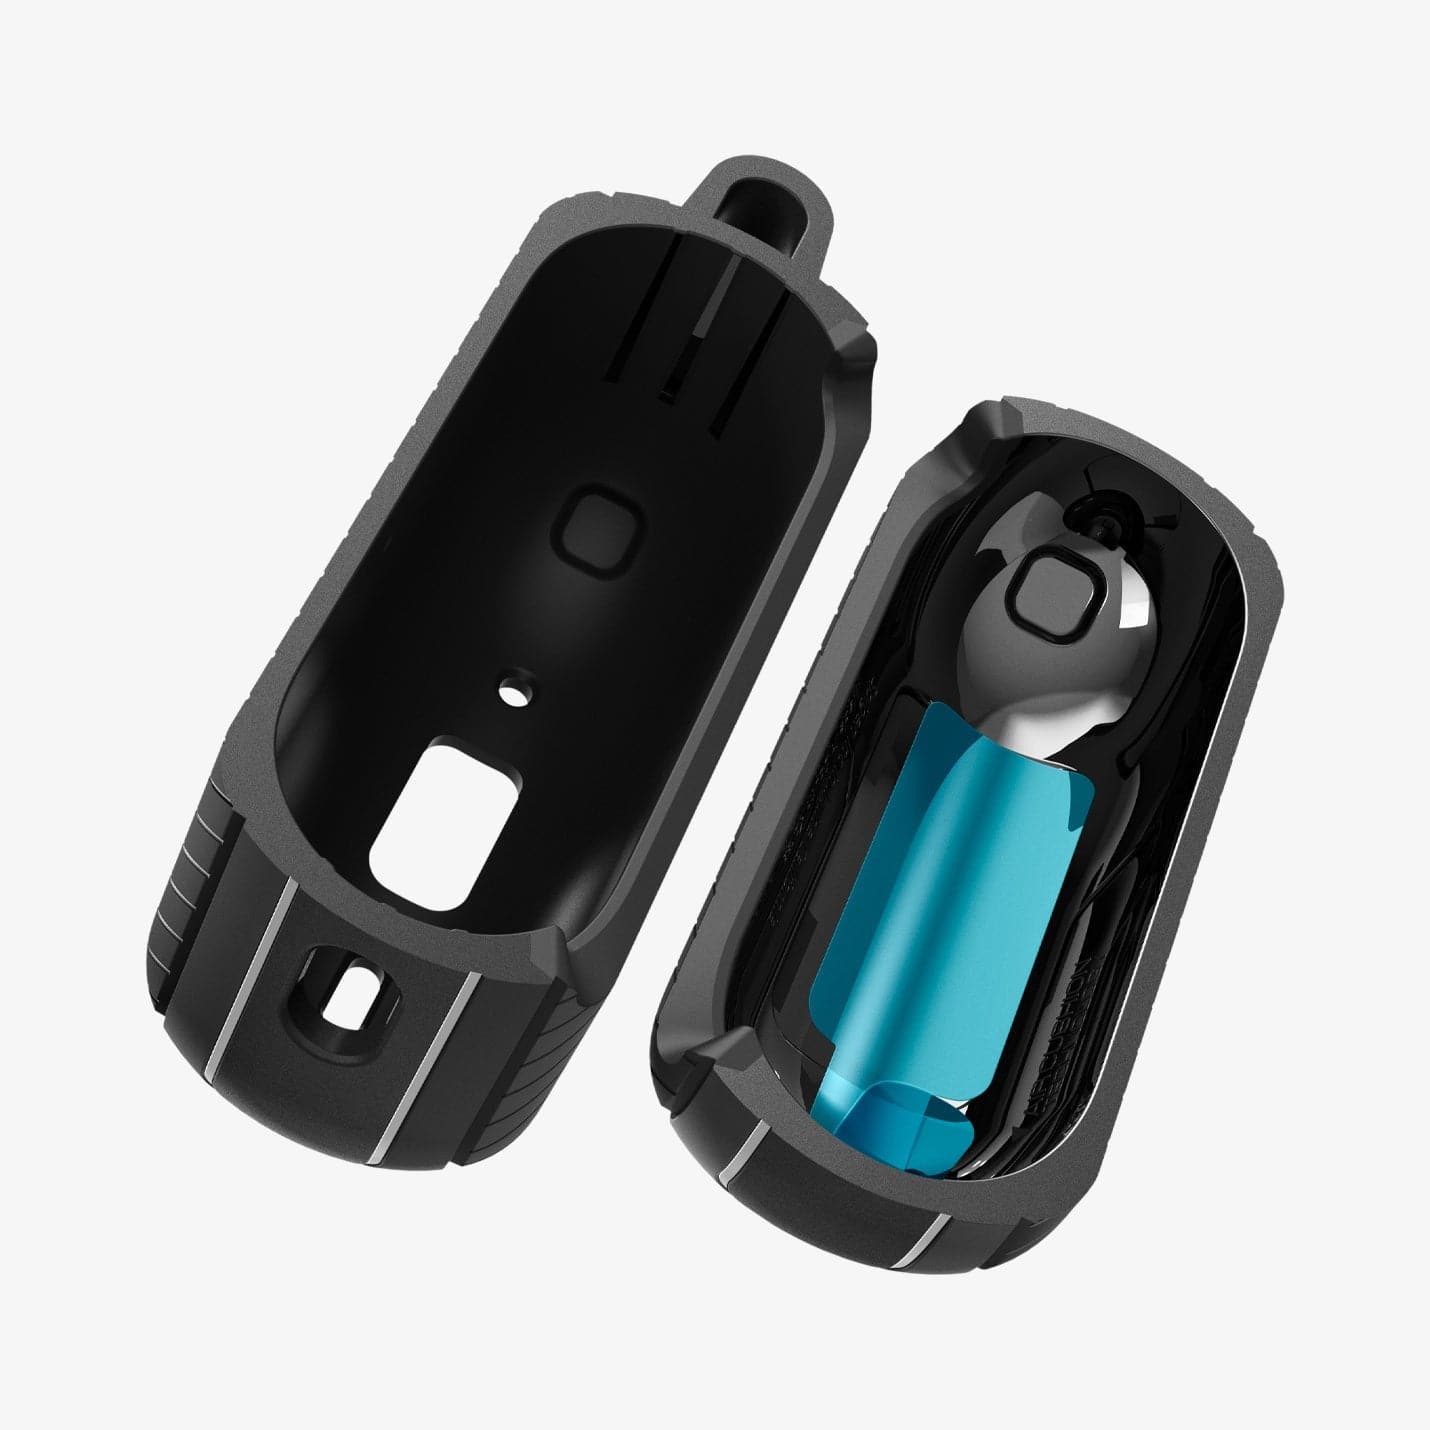 ACS05484 - Apple AirPods Pro 2 Case Mag Armor (MagFit) in matte black showing the inside of case